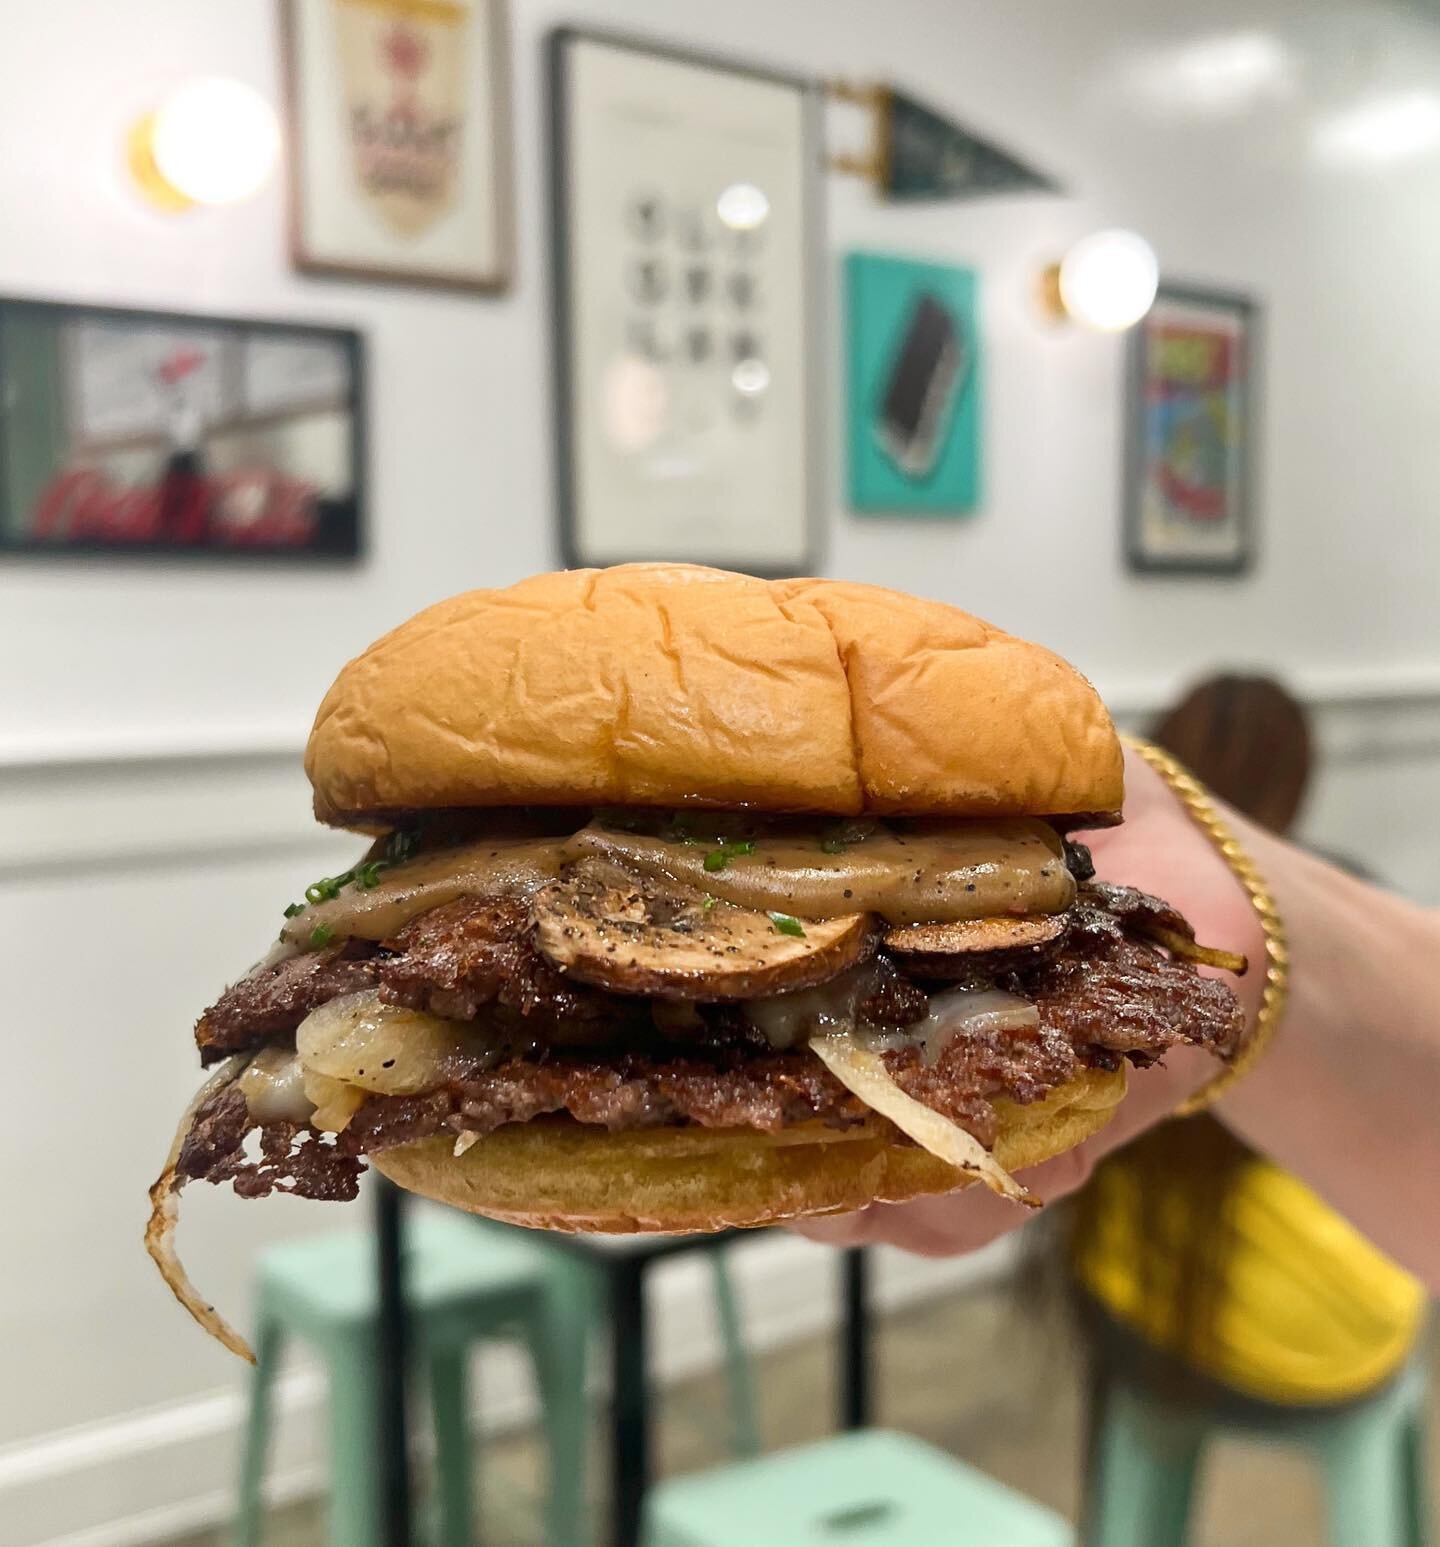 🍔We&rsquo;re excited to introduce our latest special: the Mushroom Swiss Gravy Smashburger! Double grass-fed beef patties, swiss cheese, grilled onions, cremini mushrooms, housemade gravy, and a sprinkle of chives. A limited-time delight available u